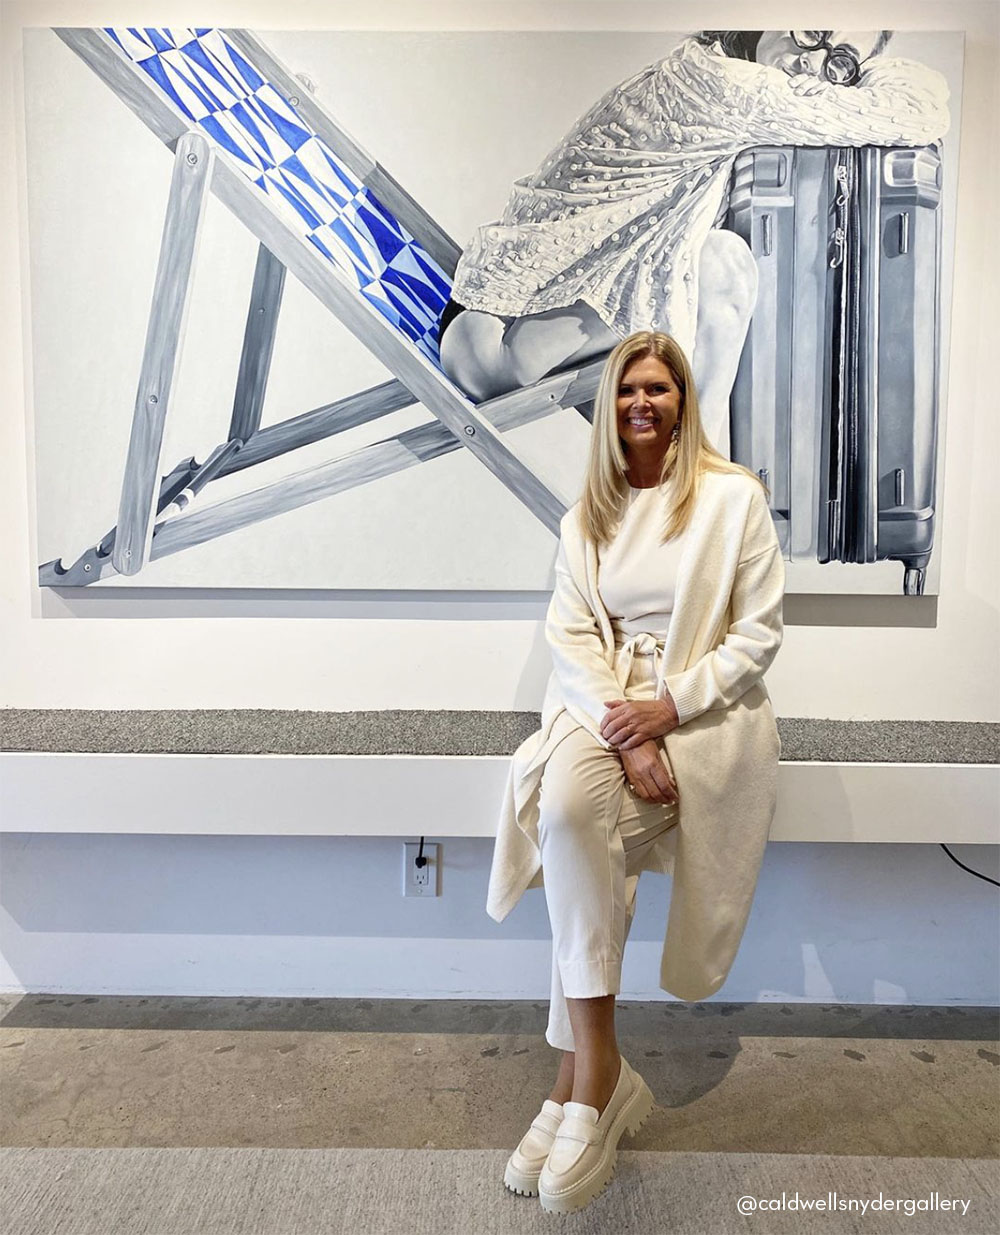 Marta Penter at the reception for her opening of "Parallel Time" at Caldwell Snyder Gallery in Montecito, Photo: @caldwellsnydergallery